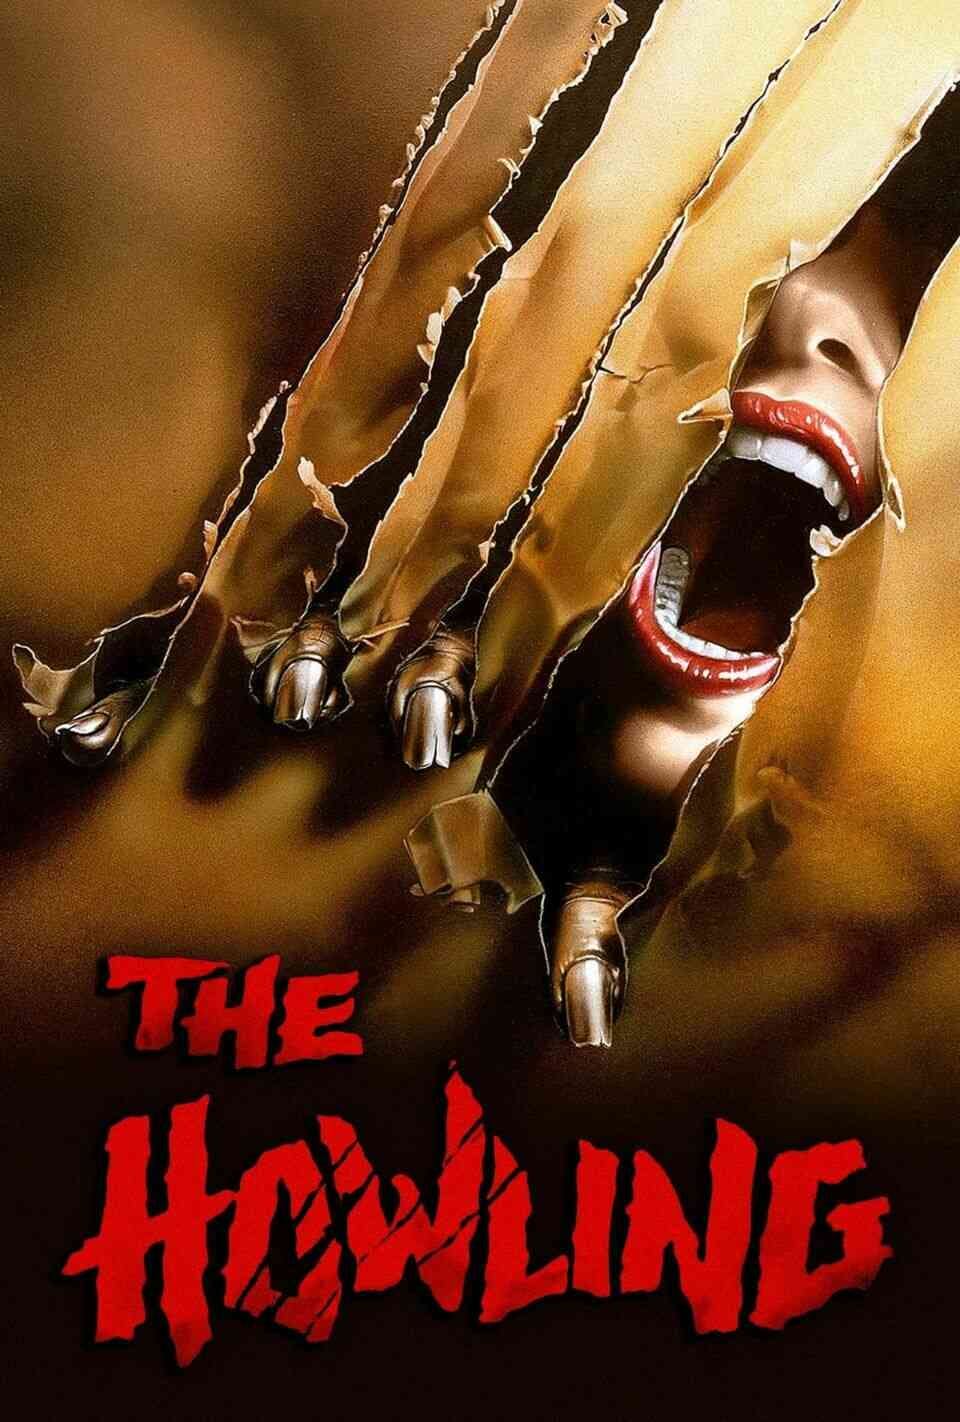 Read The Howling screenplay (poster)